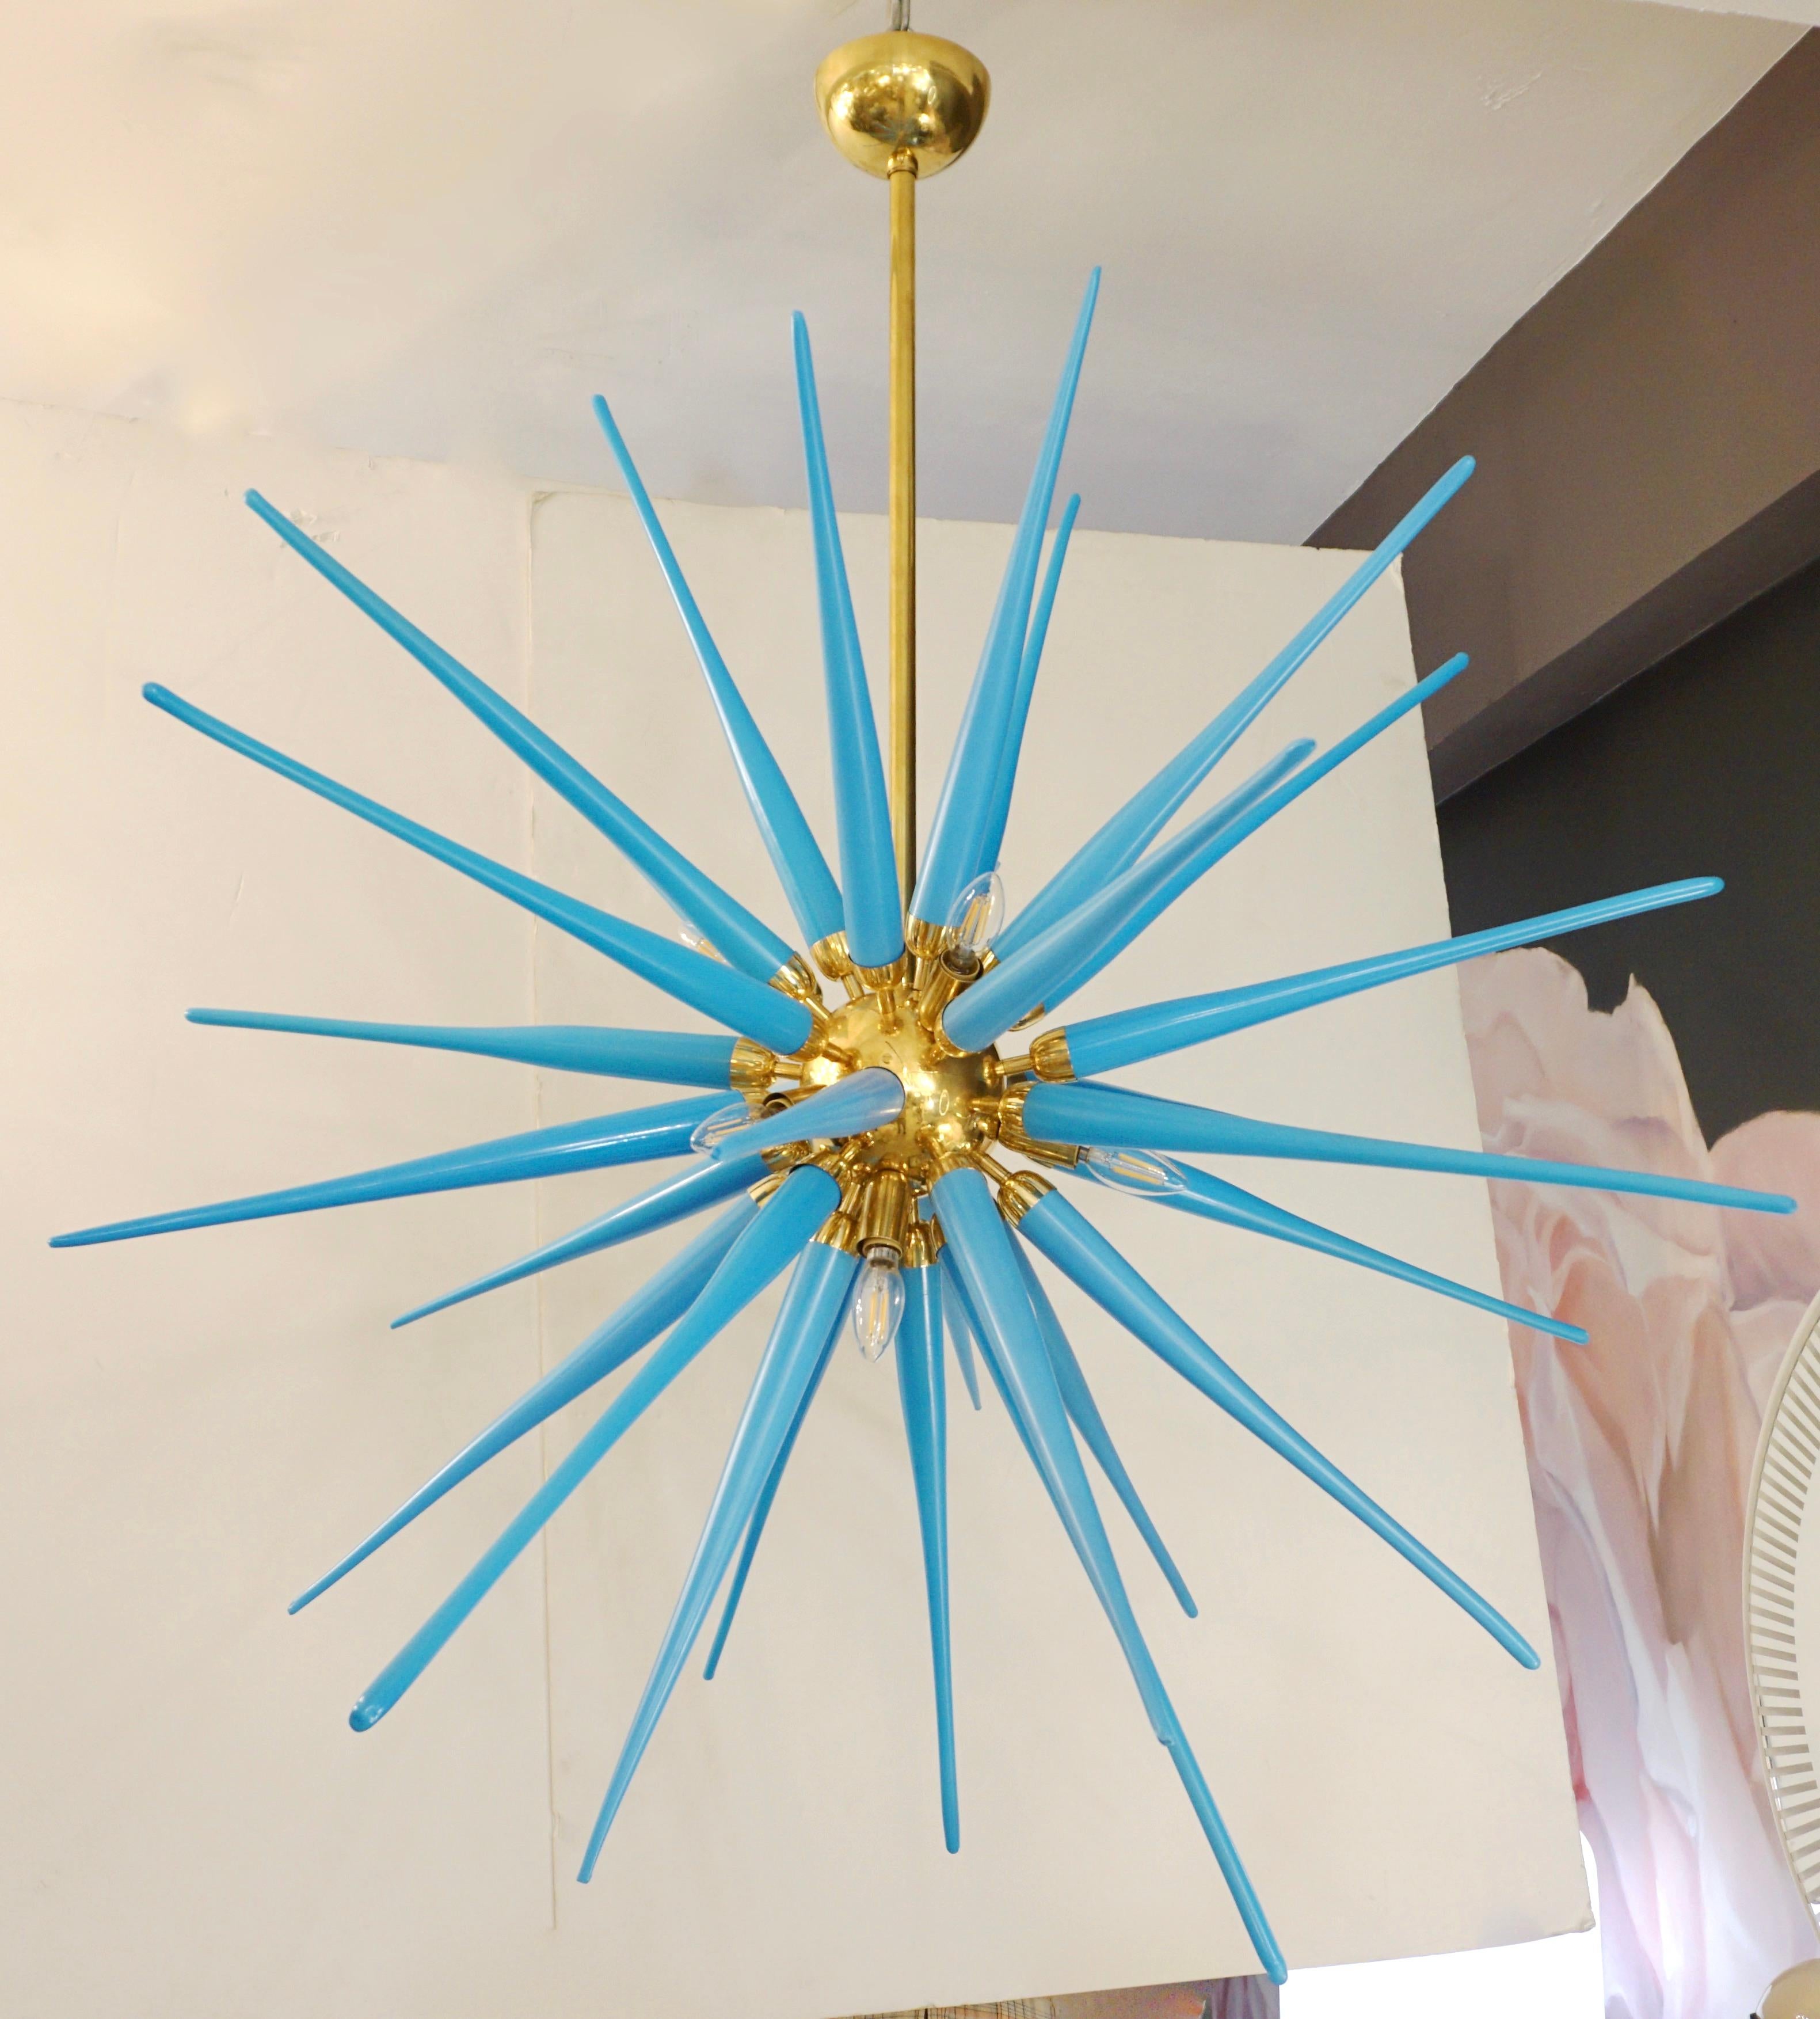 A pair available now - contemporary bespoke creation realized for Cosulich Interiors & Antiques NYC, entirely handcrafted in Murano, Italy of minimalist clean design. The polished brass handmade structure supports 30 Spikes realized in azure